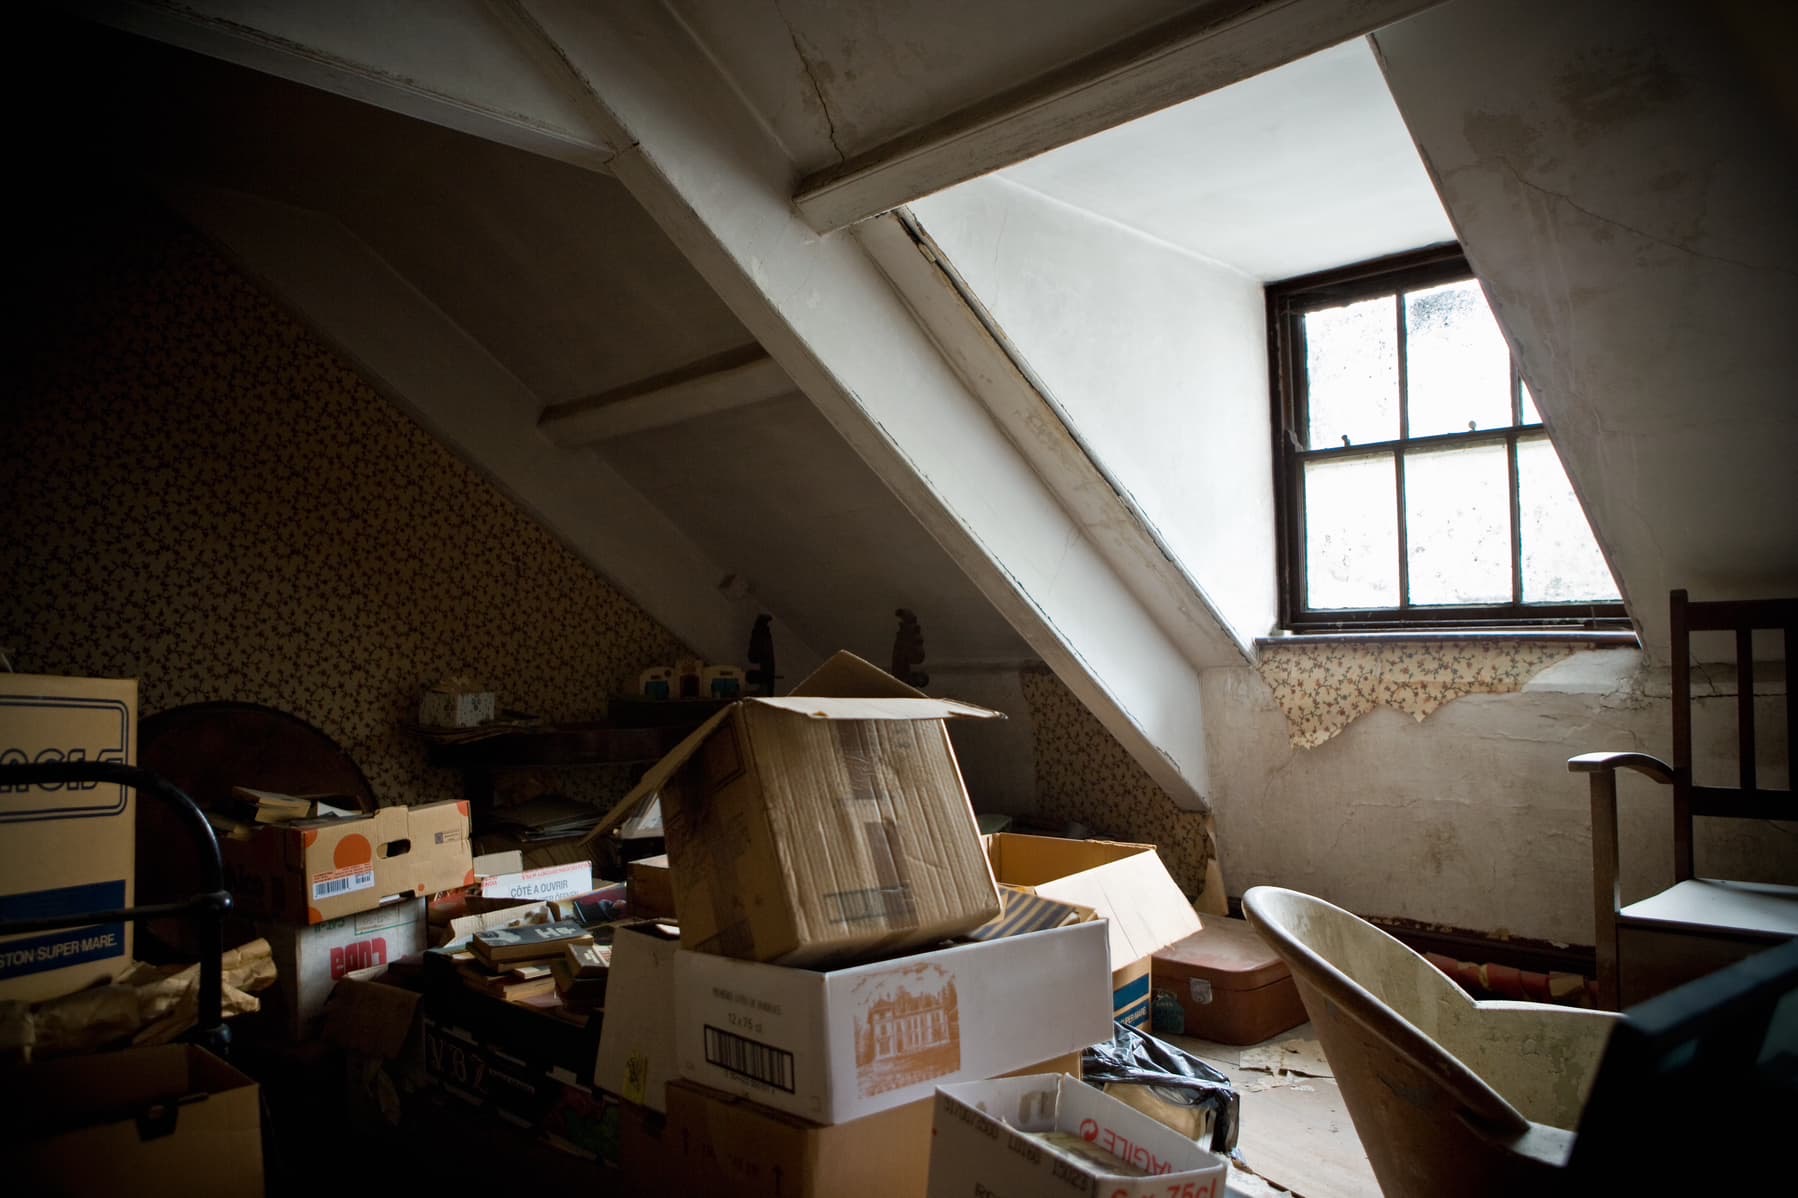 What Can You Store In An Attic